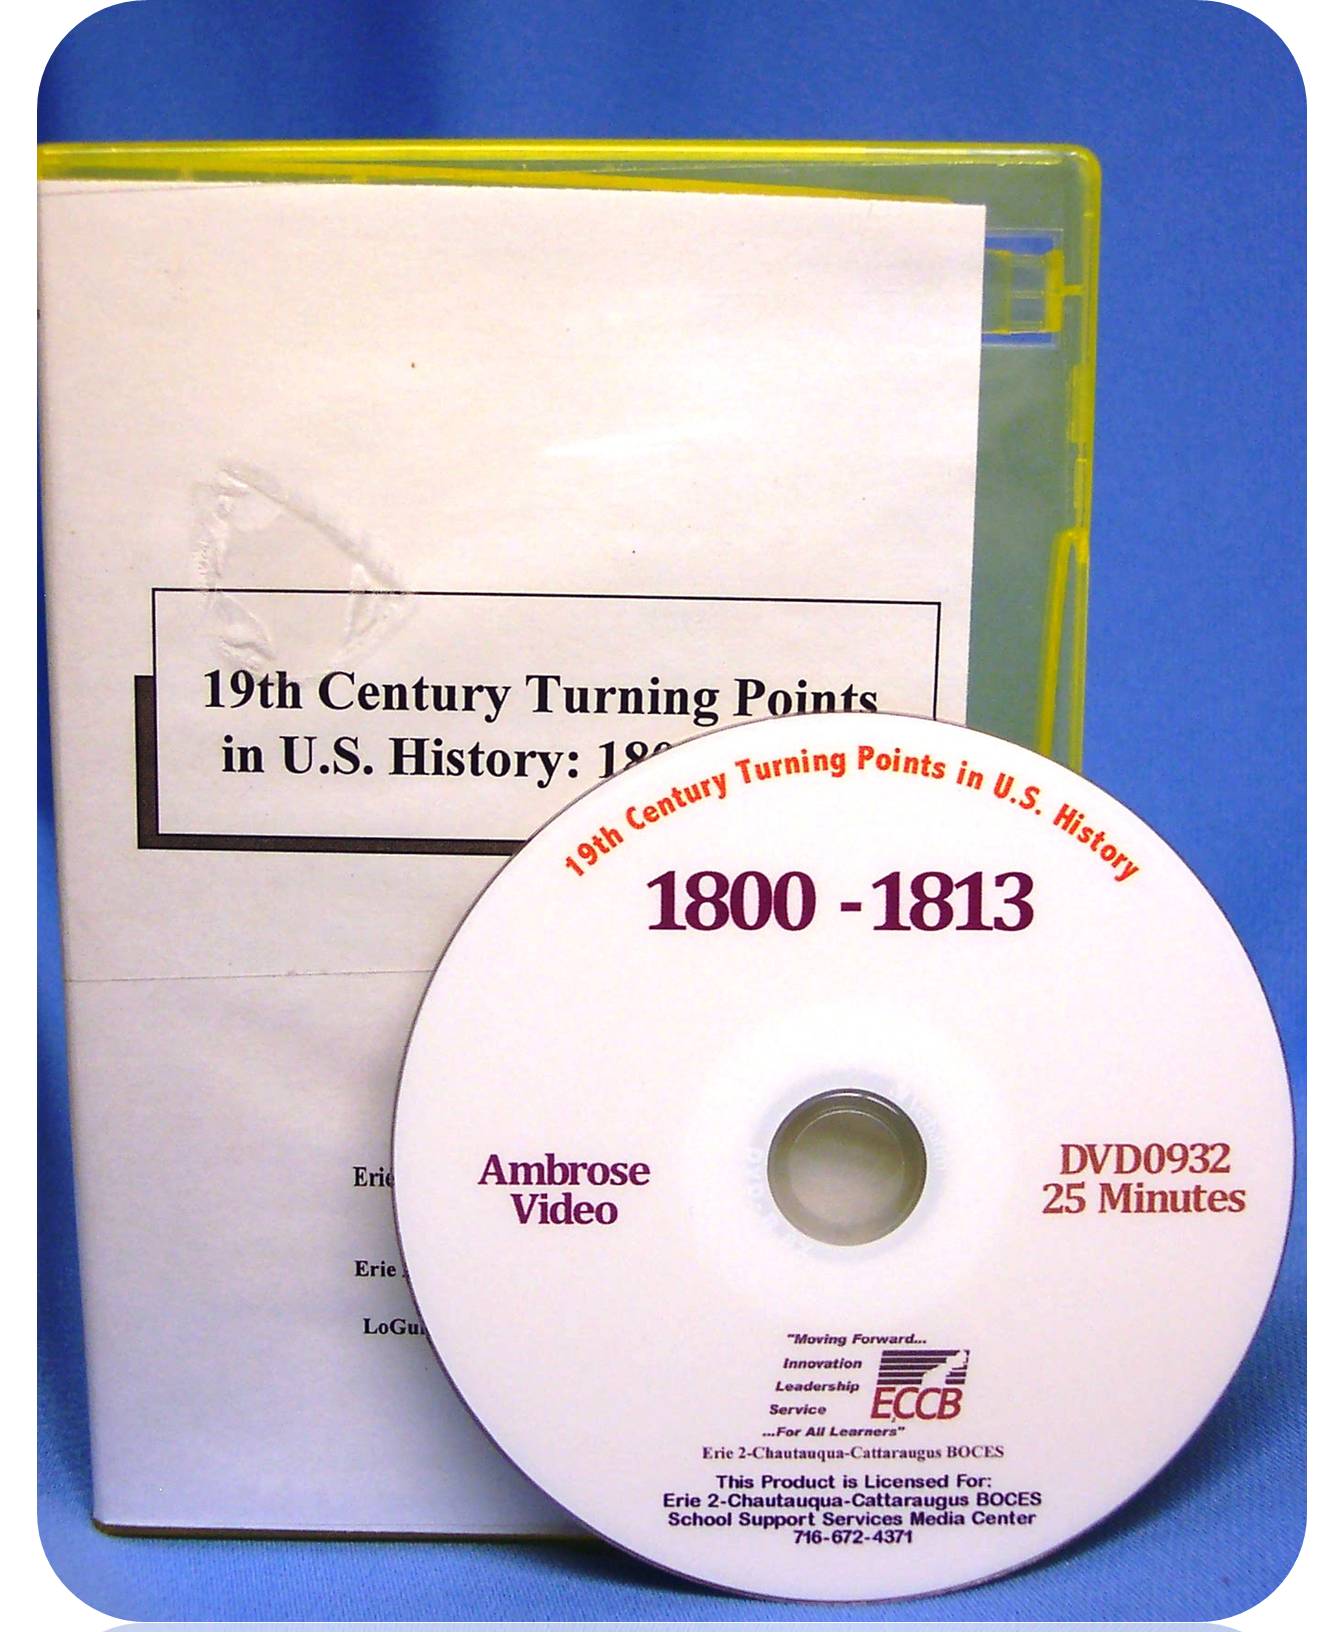 19th Century Turning Points in U.S. History: 1800 - 1813